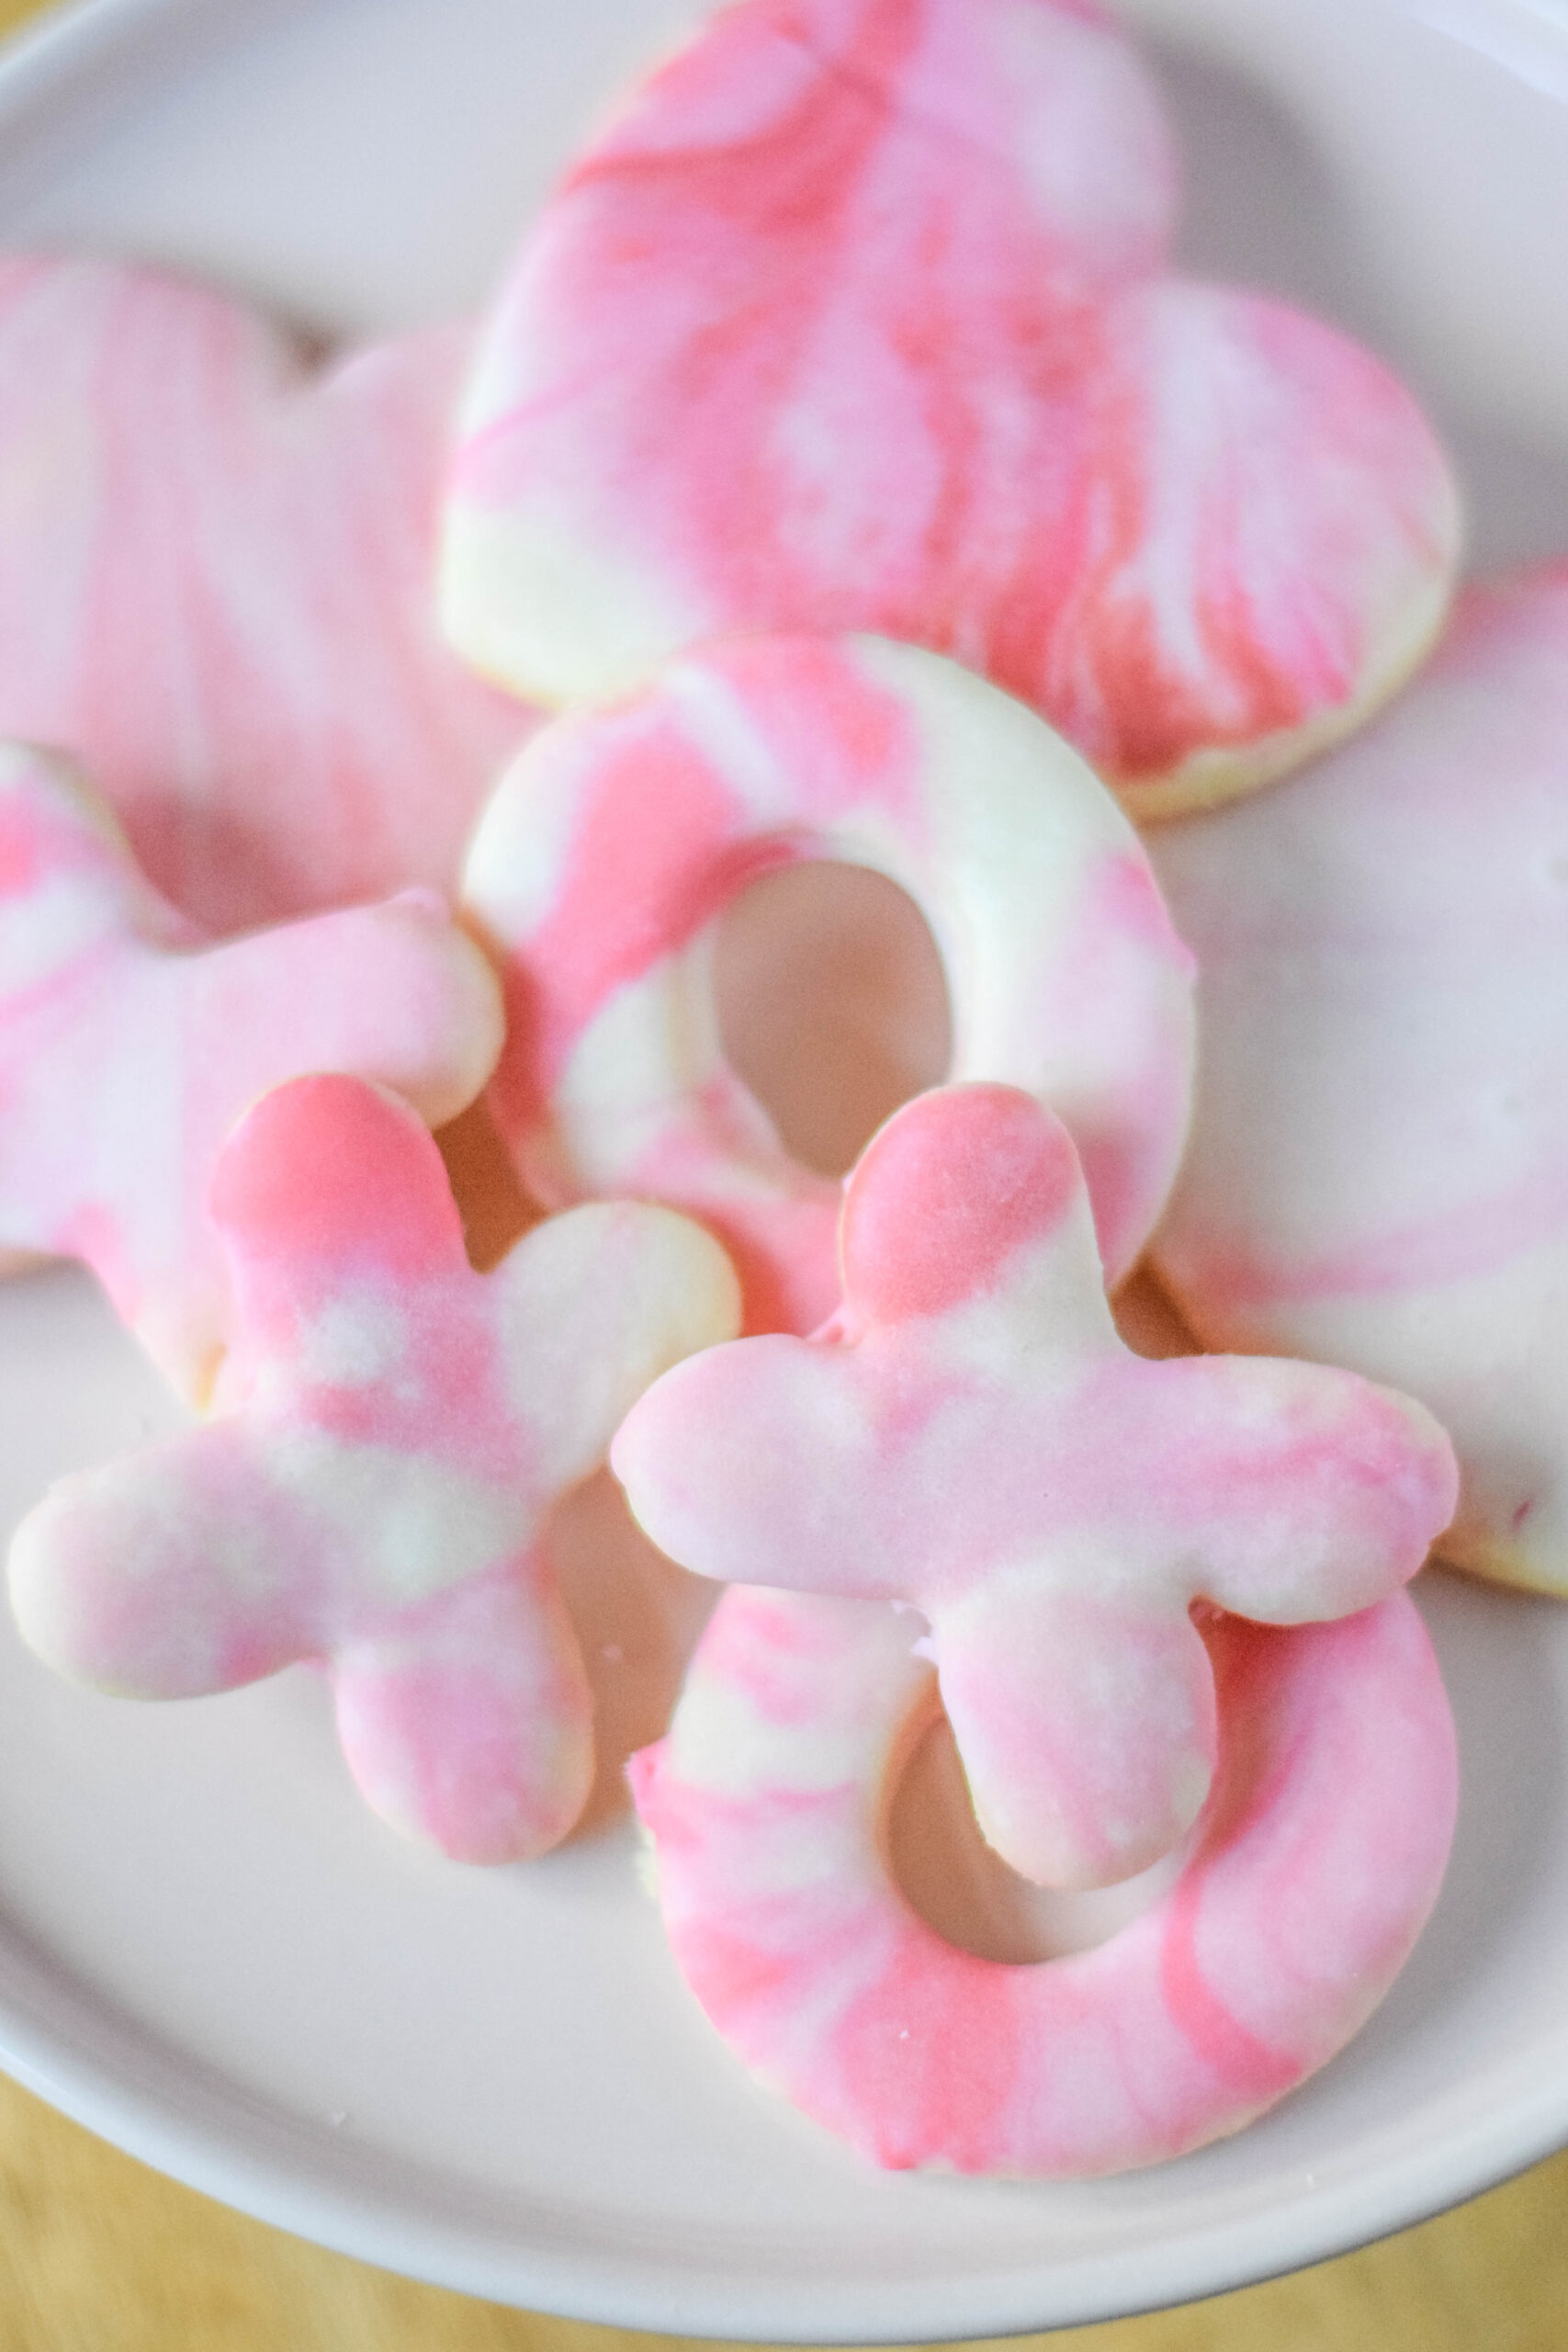 XOXO sugar cookies with red, pink, and white marble icing